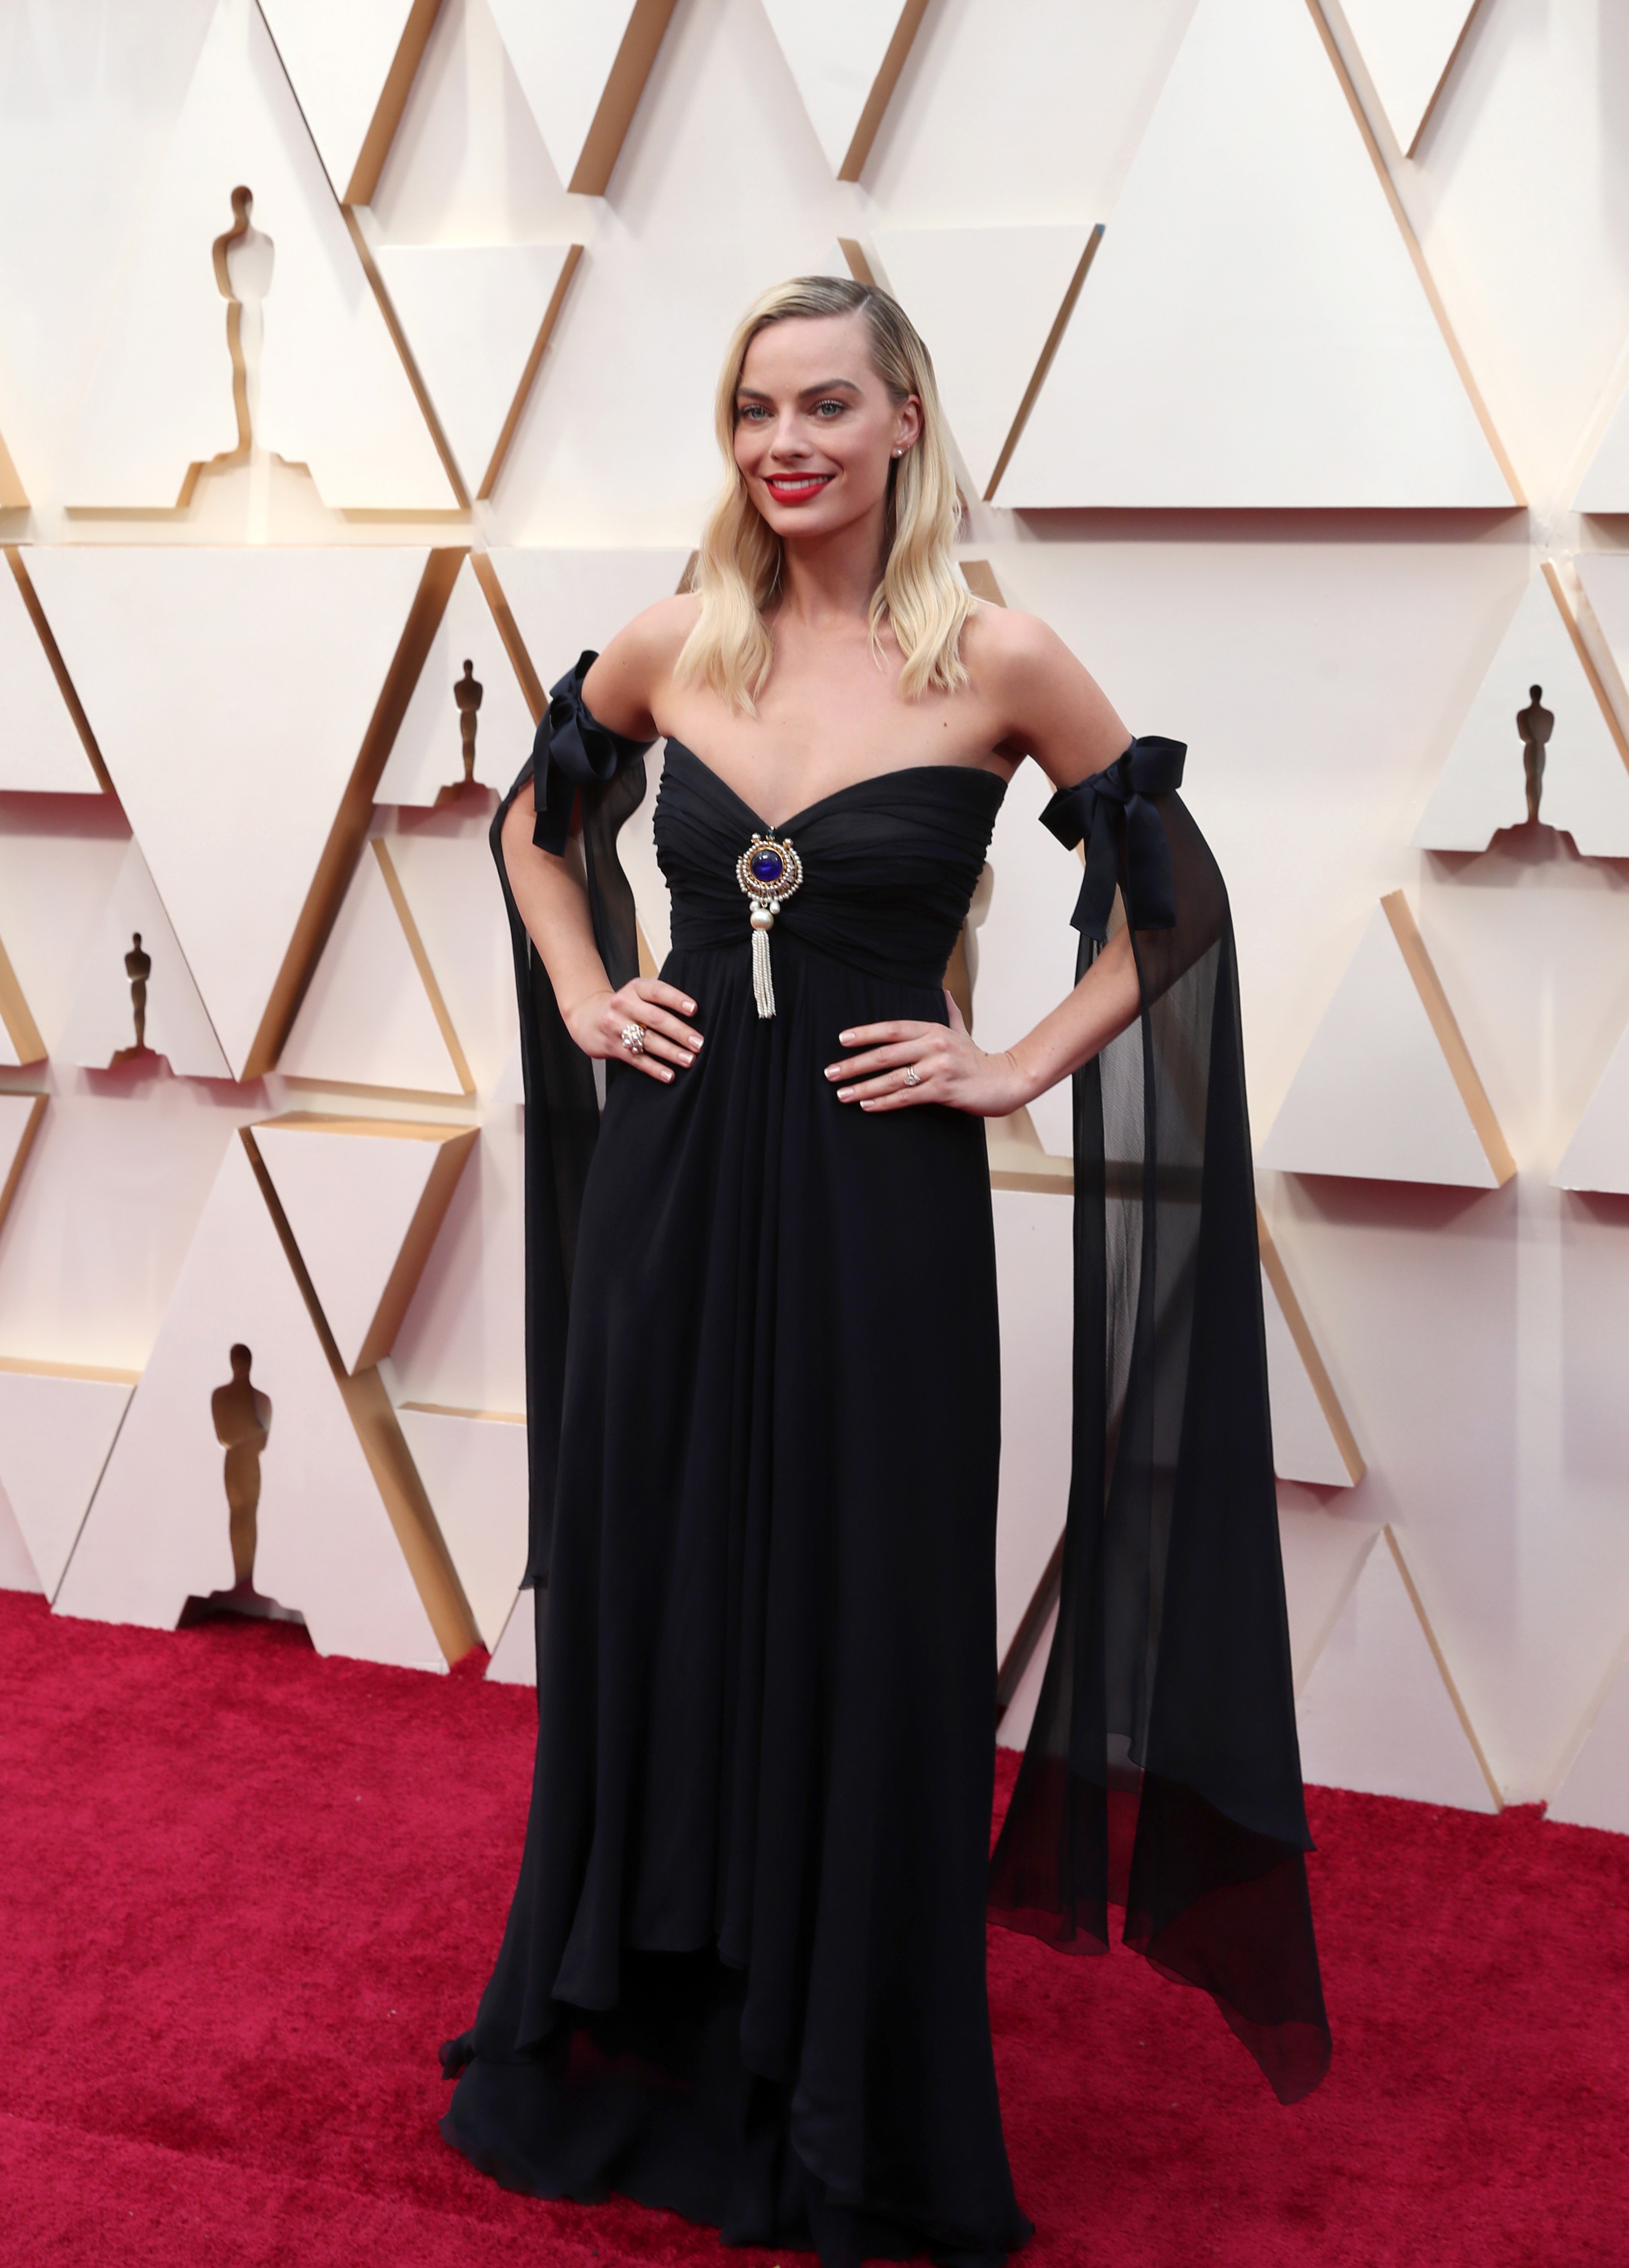 Oscars 2020 best dressed: A-listers take safe style route on lacklustre red carpet | South China Morning Post